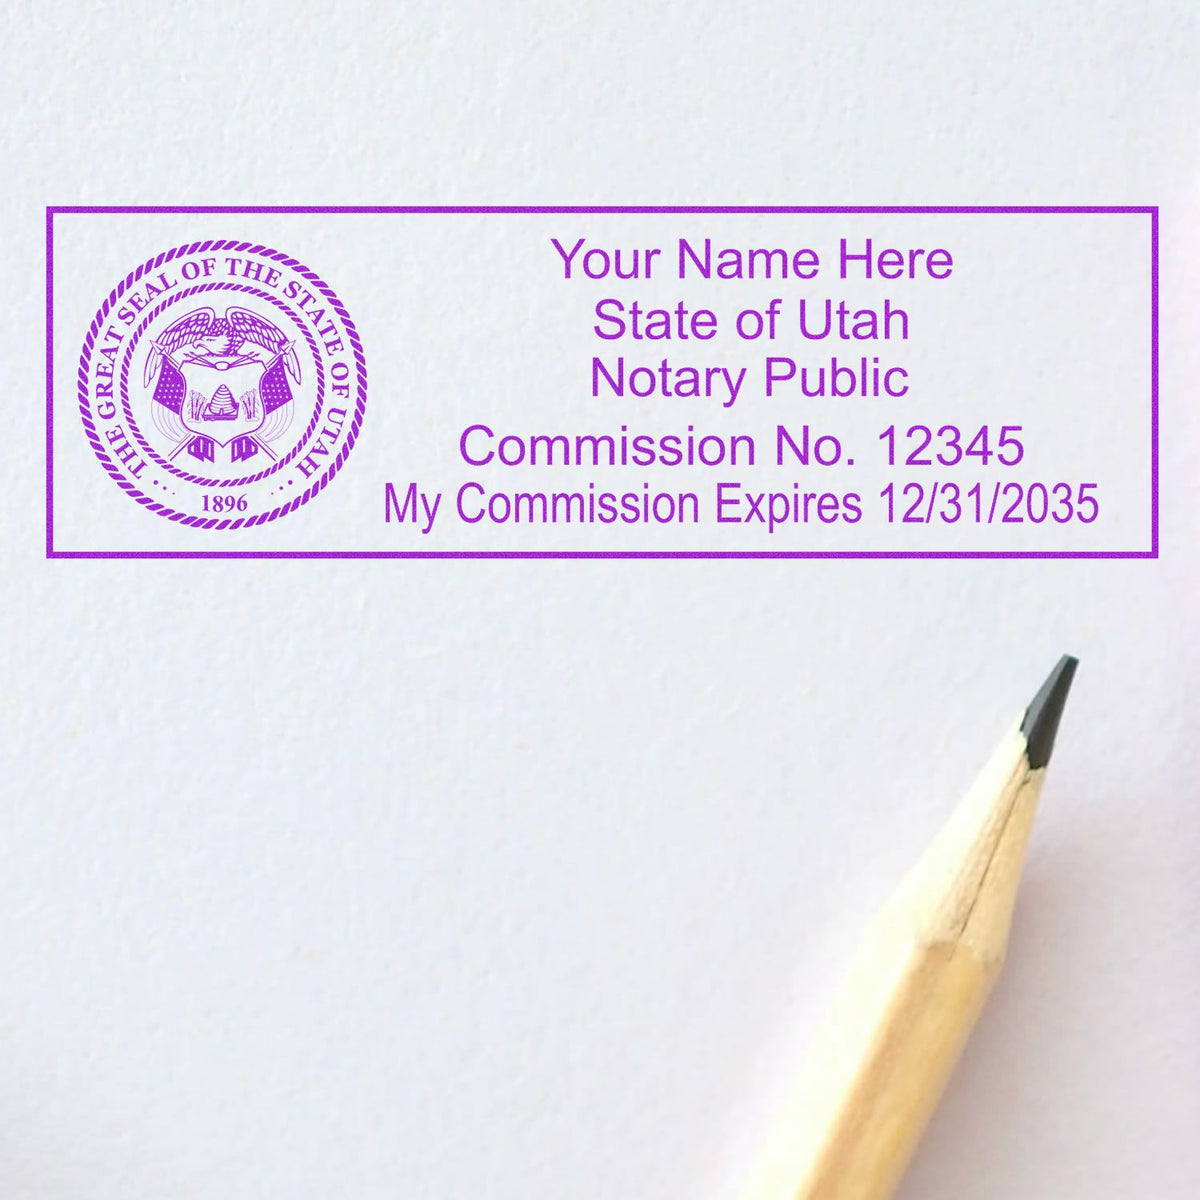 This paper is stamped with a sample imprint of the Super Slim Utah Notary Public Stamp, signifying its quality and reliability.